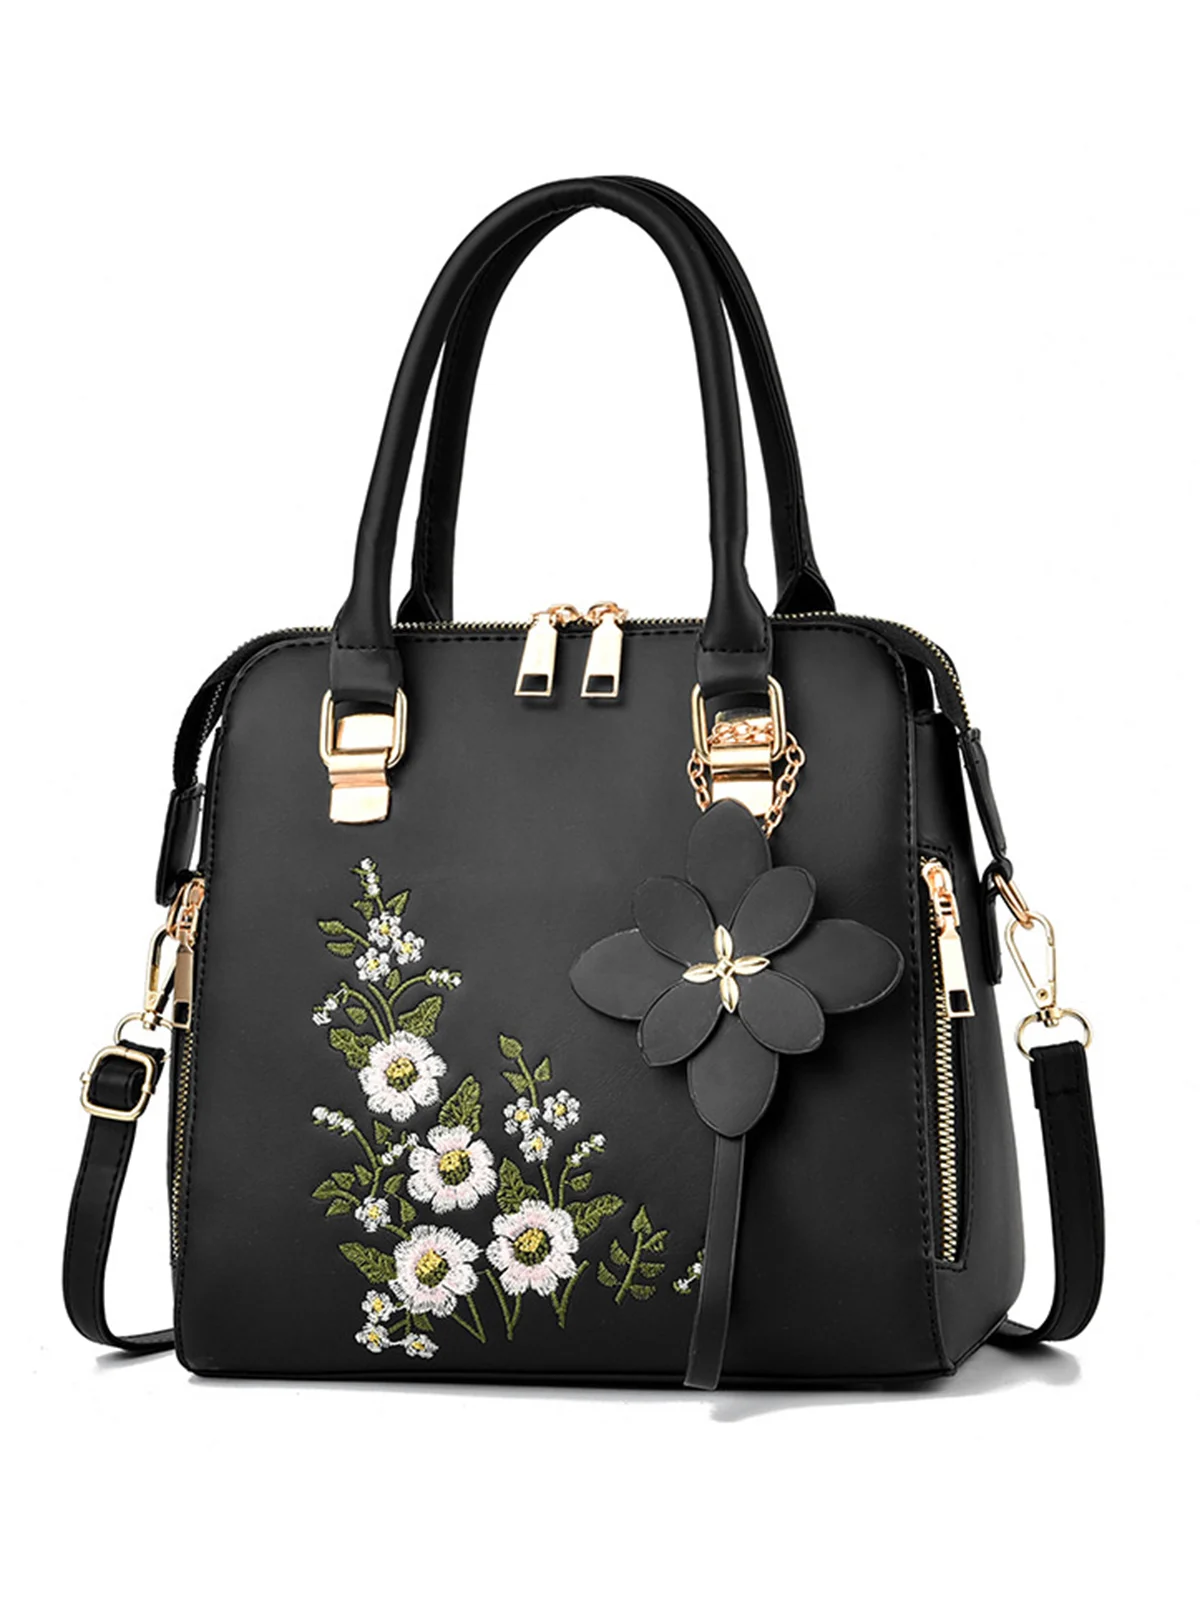 Floral Embroidery Tote Bag Commuting Large Capacity Crossbody Bag with Pendant